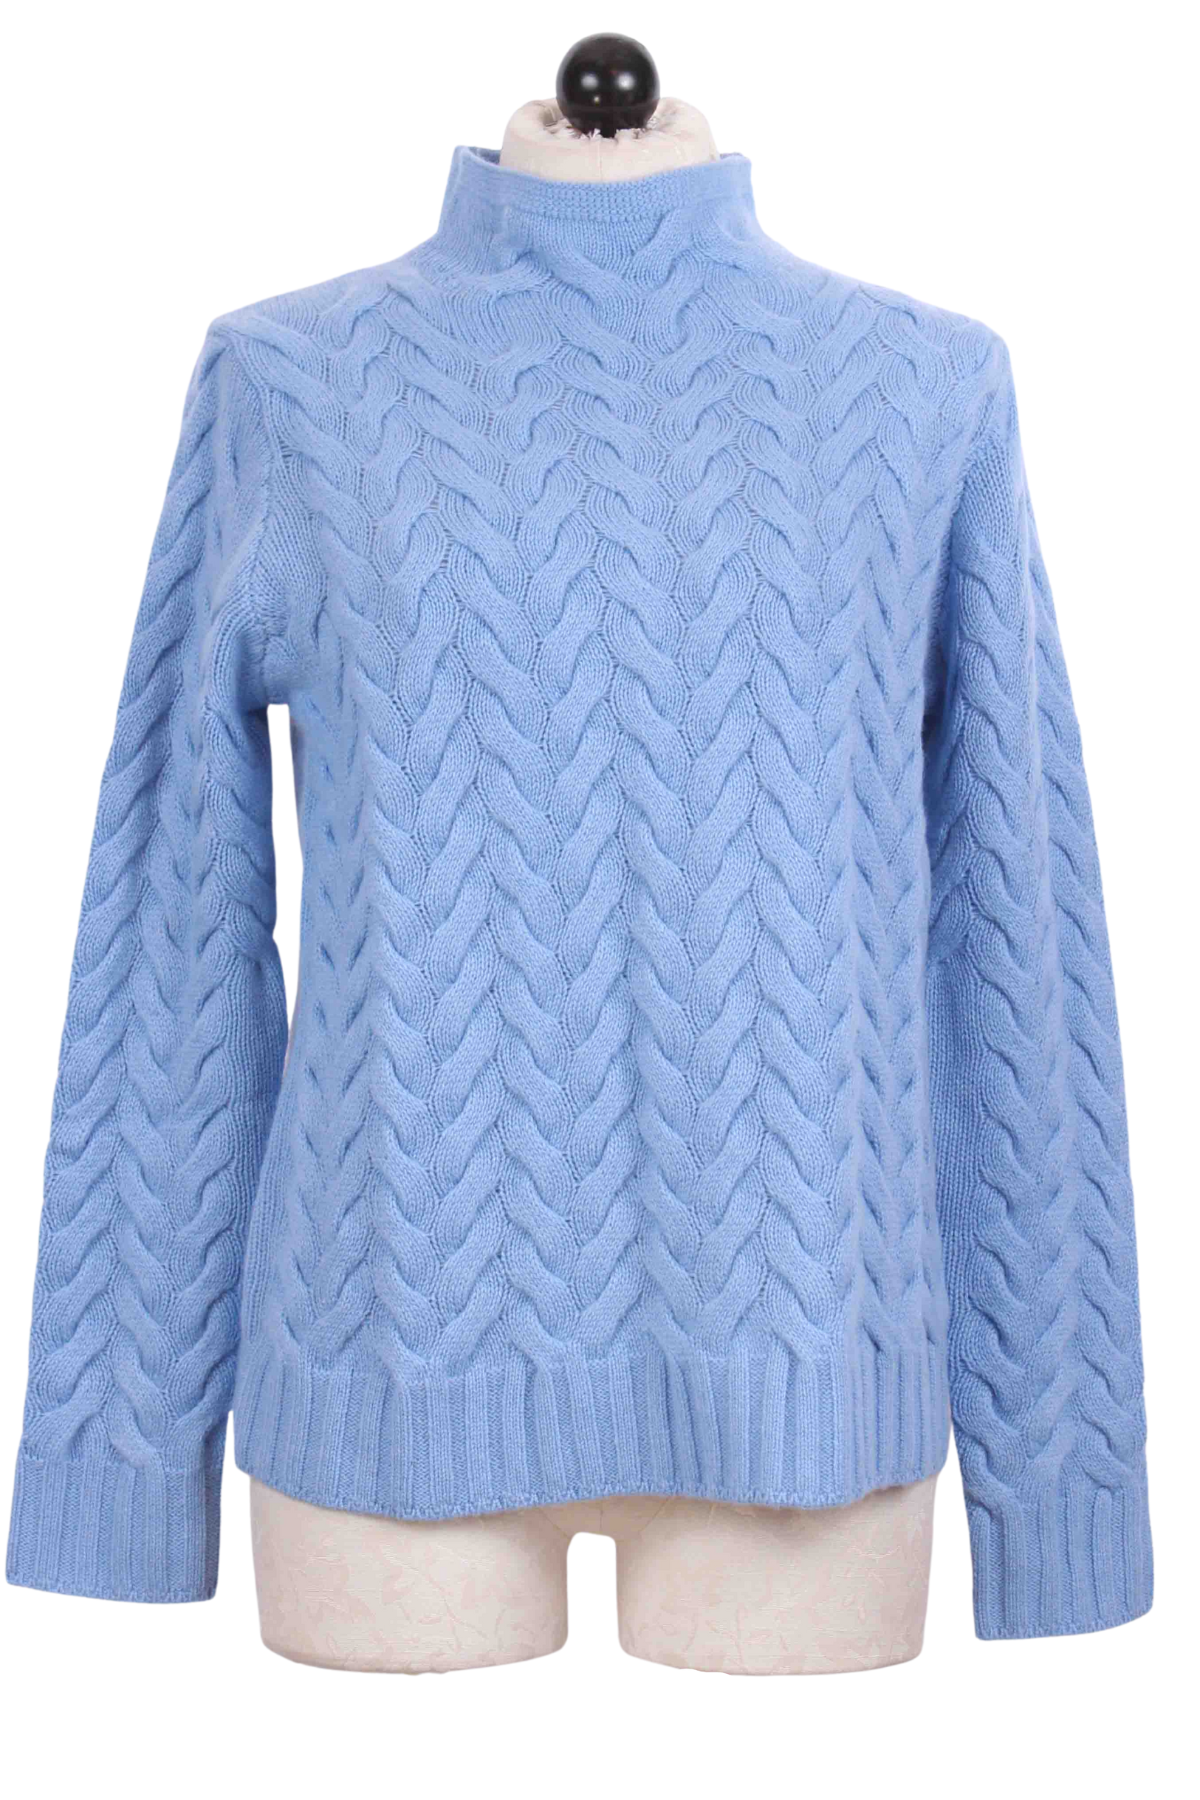 Chapel Hill blue Cashmere Simone Cable Funnel Neck Sweater by Alashan Cashmere